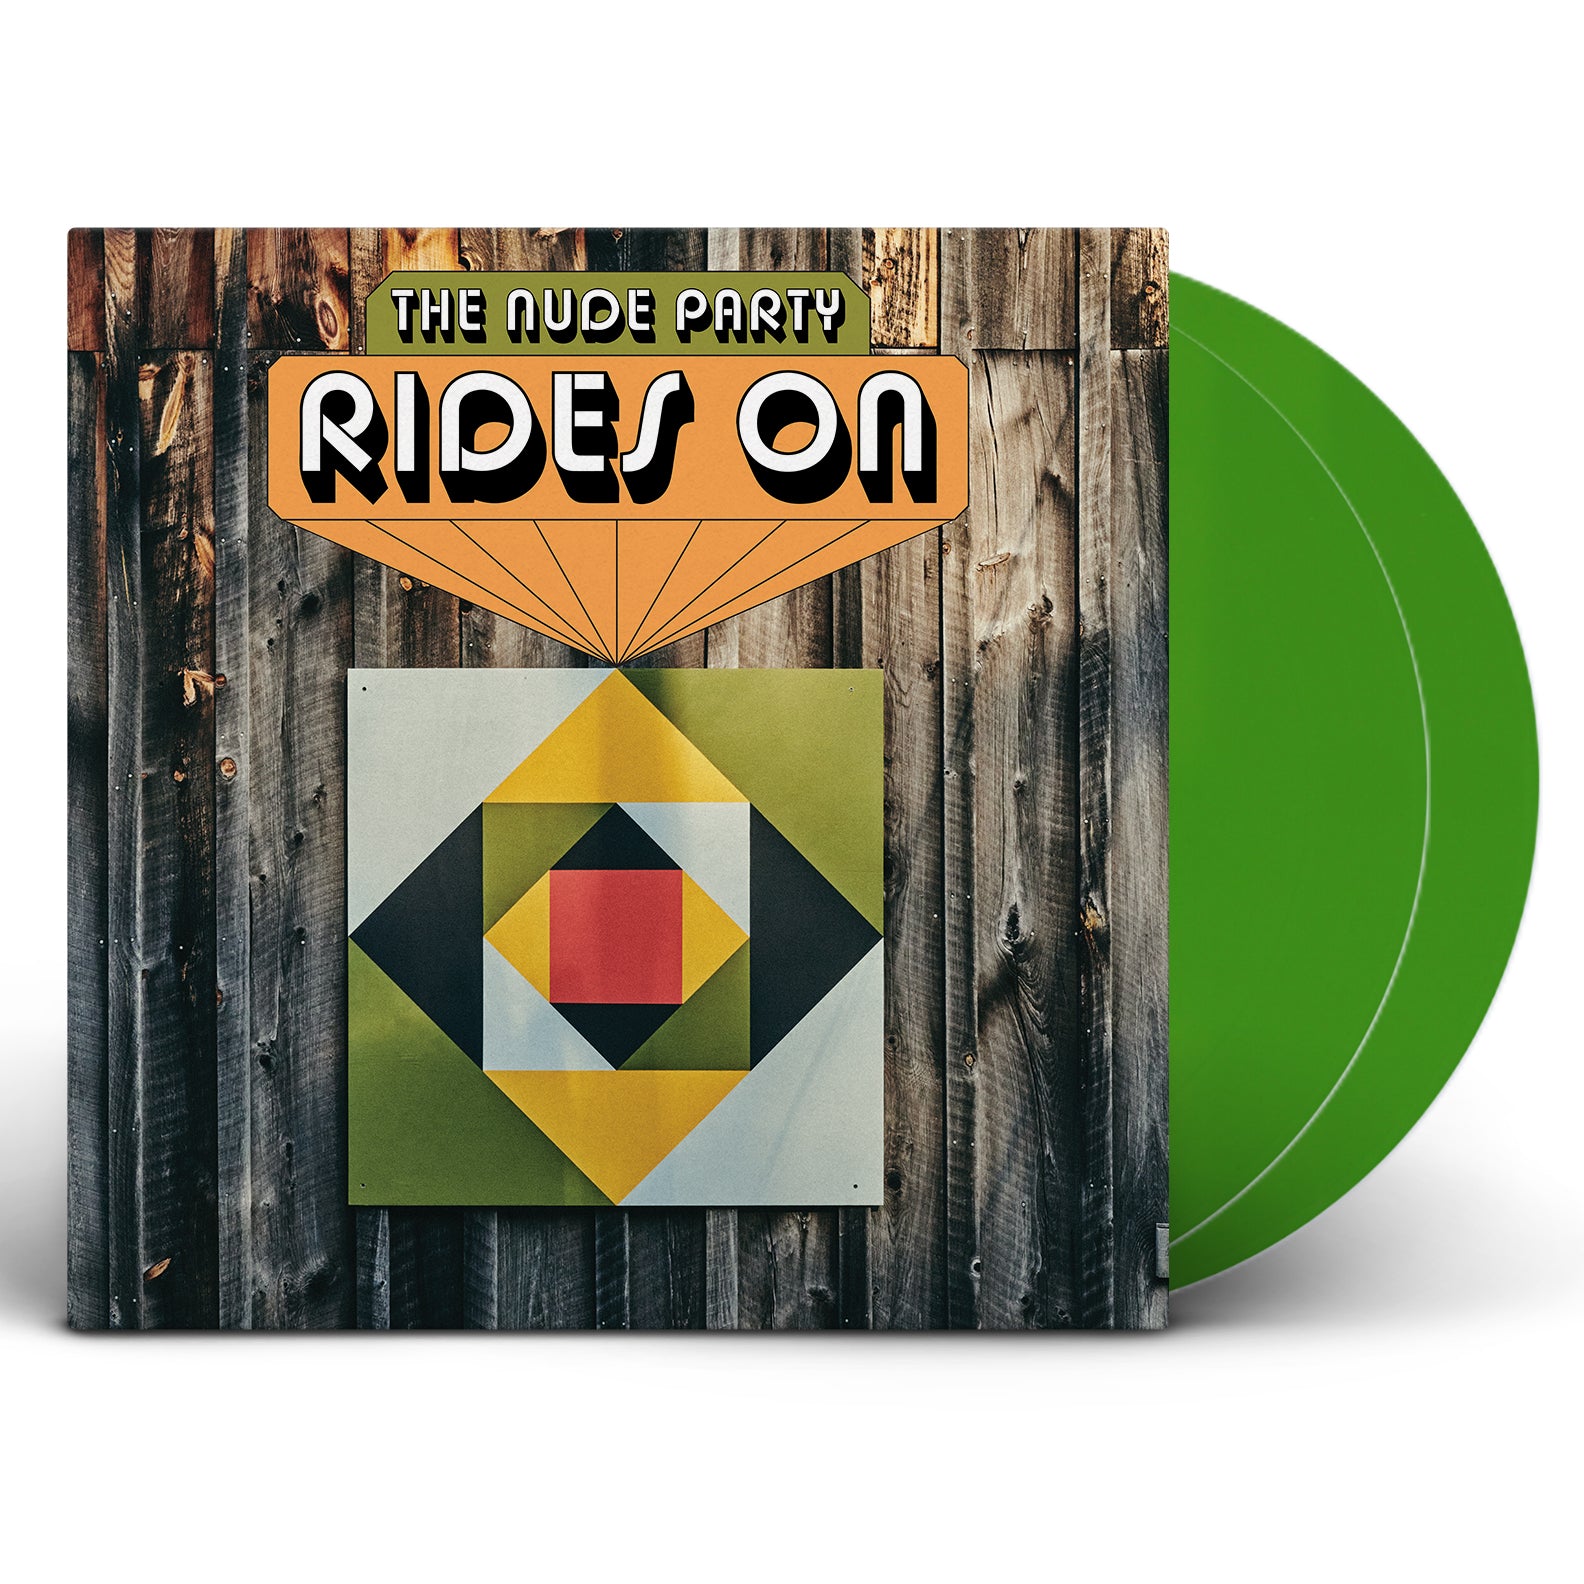 The Nude Party - Rides On [Limited Edition Color Vinyl]